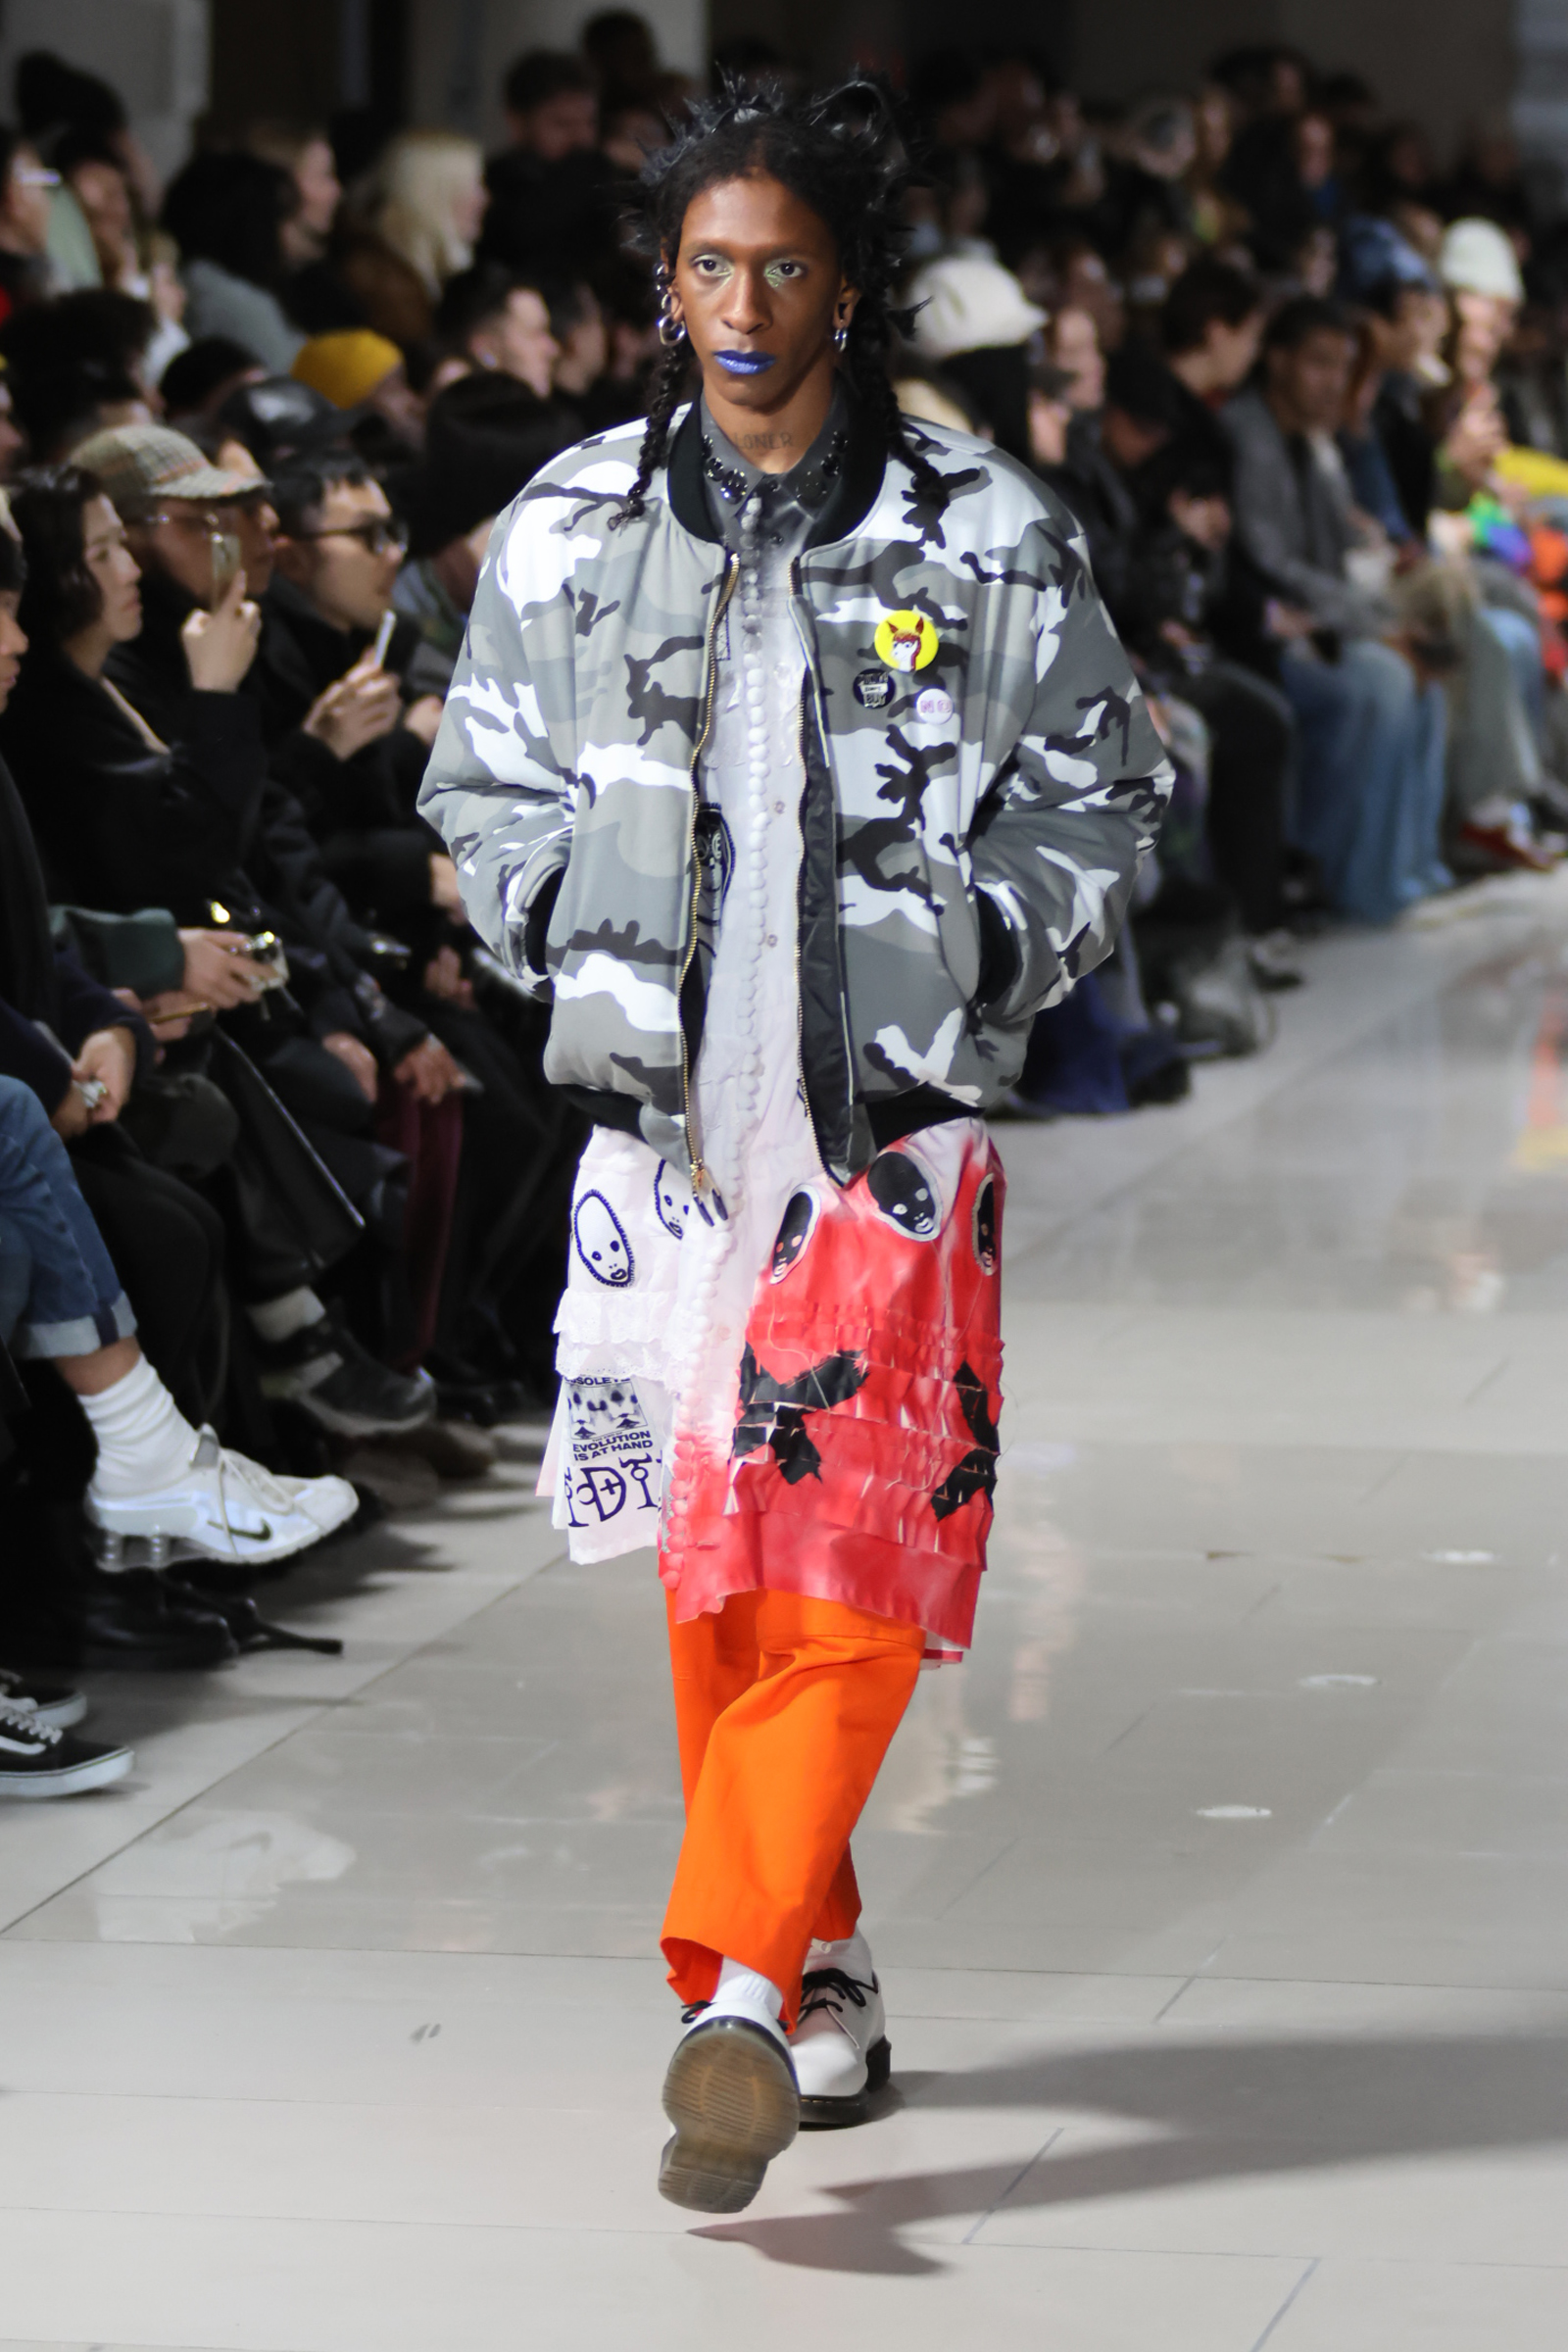 KIDILL-Unveils-'WHATEVER-HAPPENED-TO-PUNK'-at-Paris-Fashion-Week-FW24 